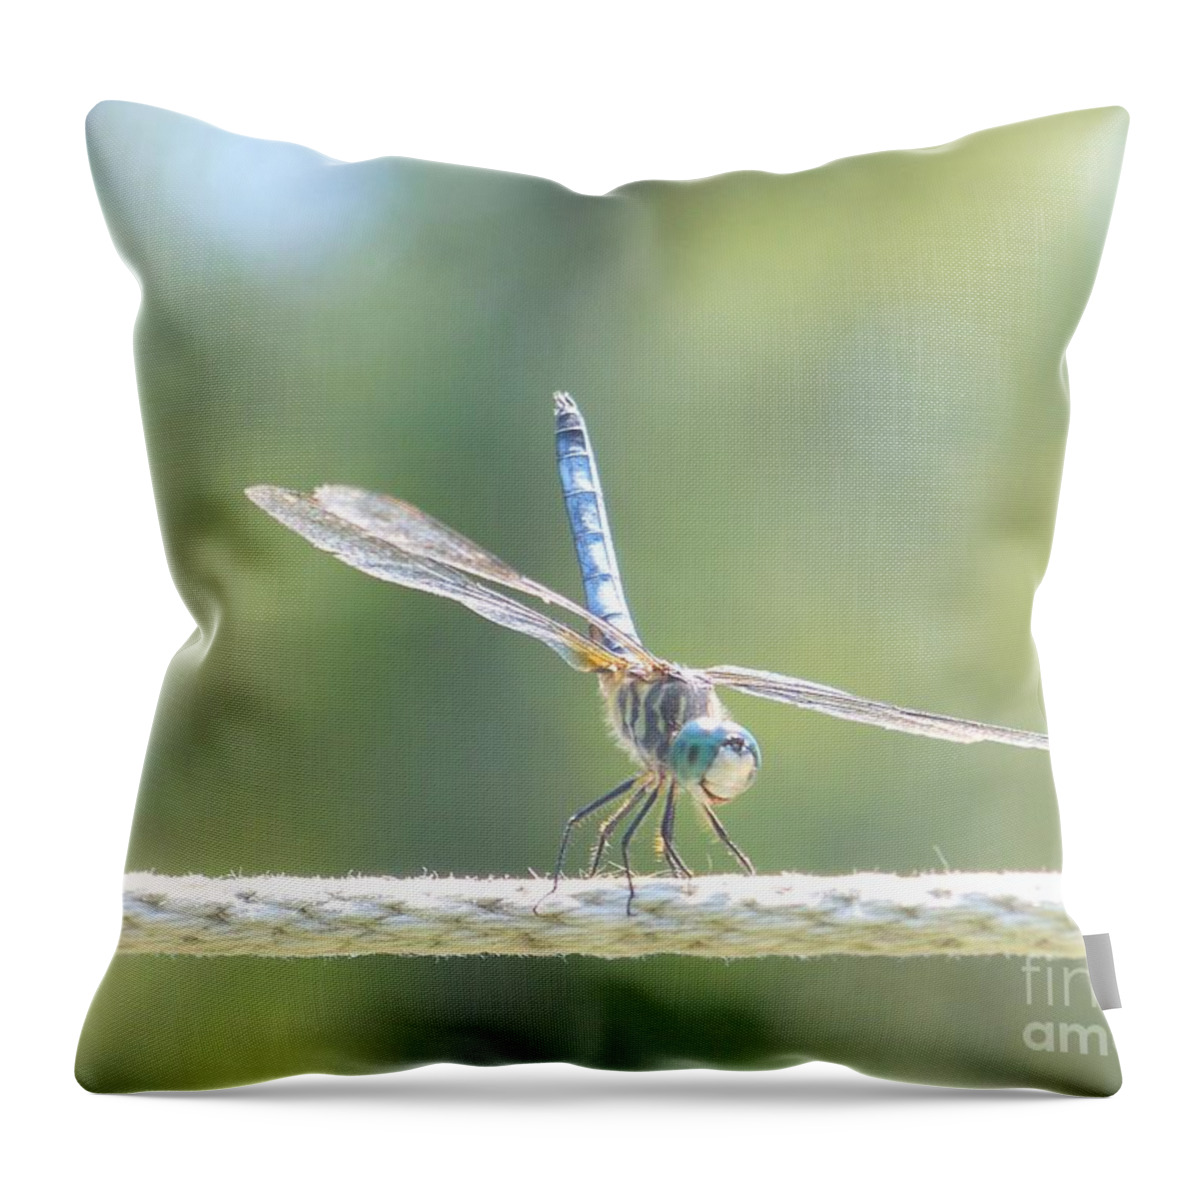 Macro Throw Pillow featuring the photograph Smiling Dragonfly by Eunice Miller